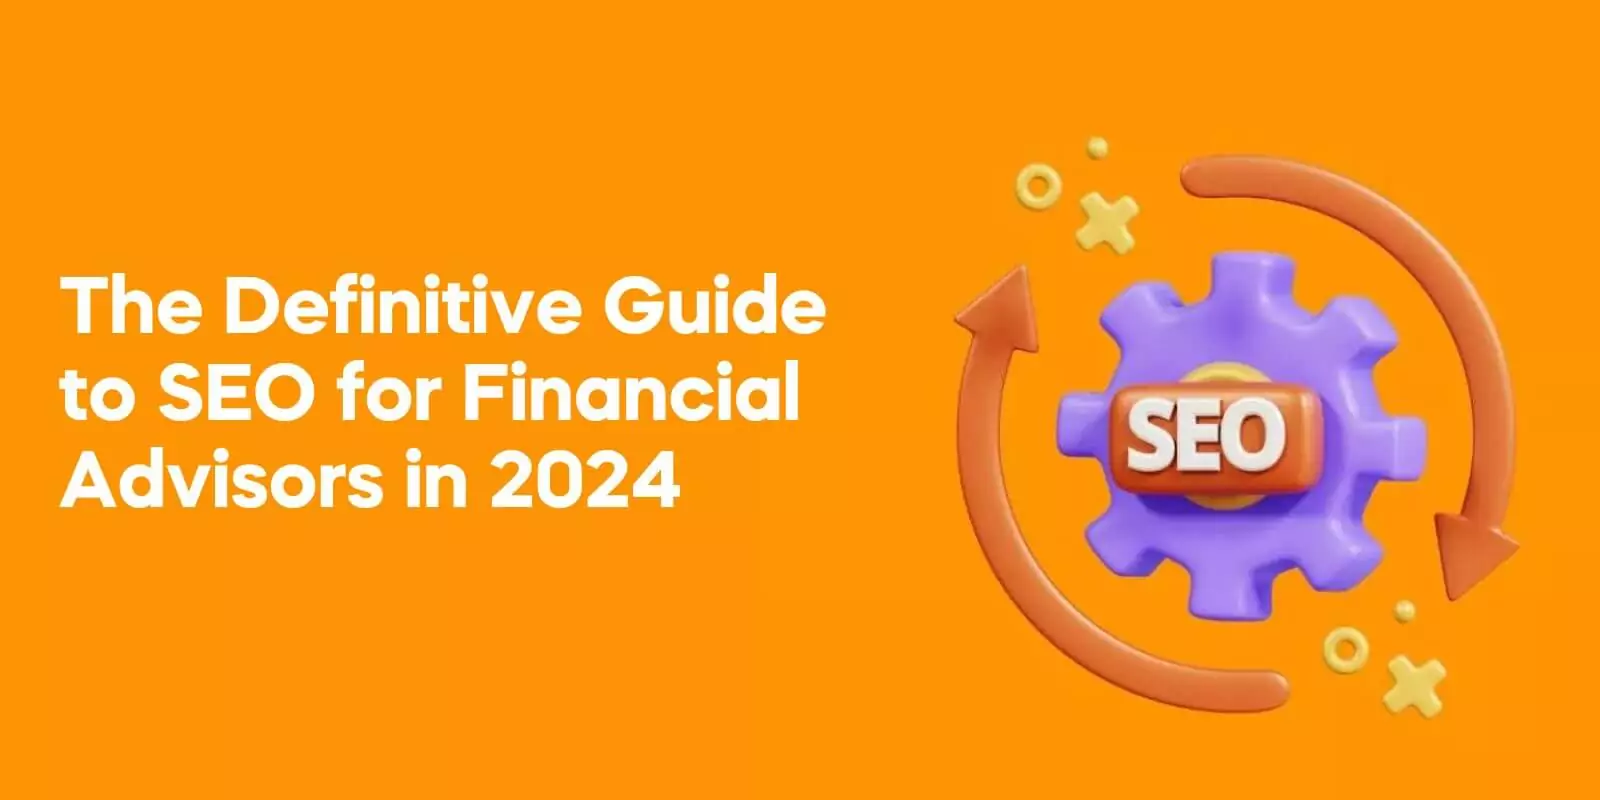 The Definitive Guide to SEO for Financial Advisors in 2024